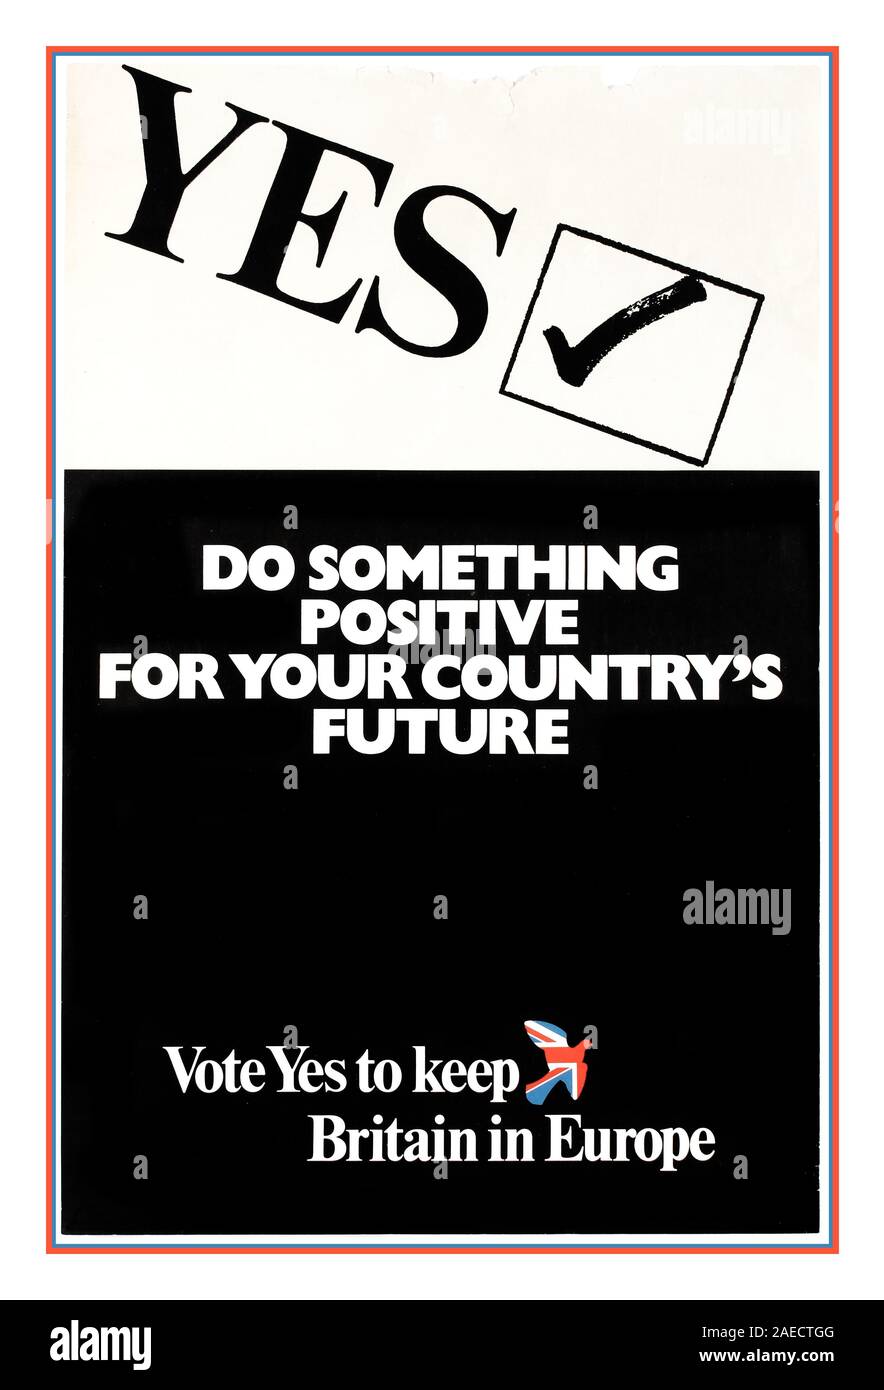 1970’s REFERENDUM Original vintage election propaganda poster for the 1975 European Union Membership Referendum held in the United Kingdom - YES - Do something positive for your country's future - Vote YES to keep Britain in Europe. This European Communities Membership Referendum (aka the Referendum on the European Community or Common Market / Common Market Referendum / EEC Membership Referendum) was held on 5 June 1975 under the provisions of the Referendum Act 1975 by the Labour government led by Prime Minister Harold Wilson. The UK Voted Yes to remain. Stock Photo